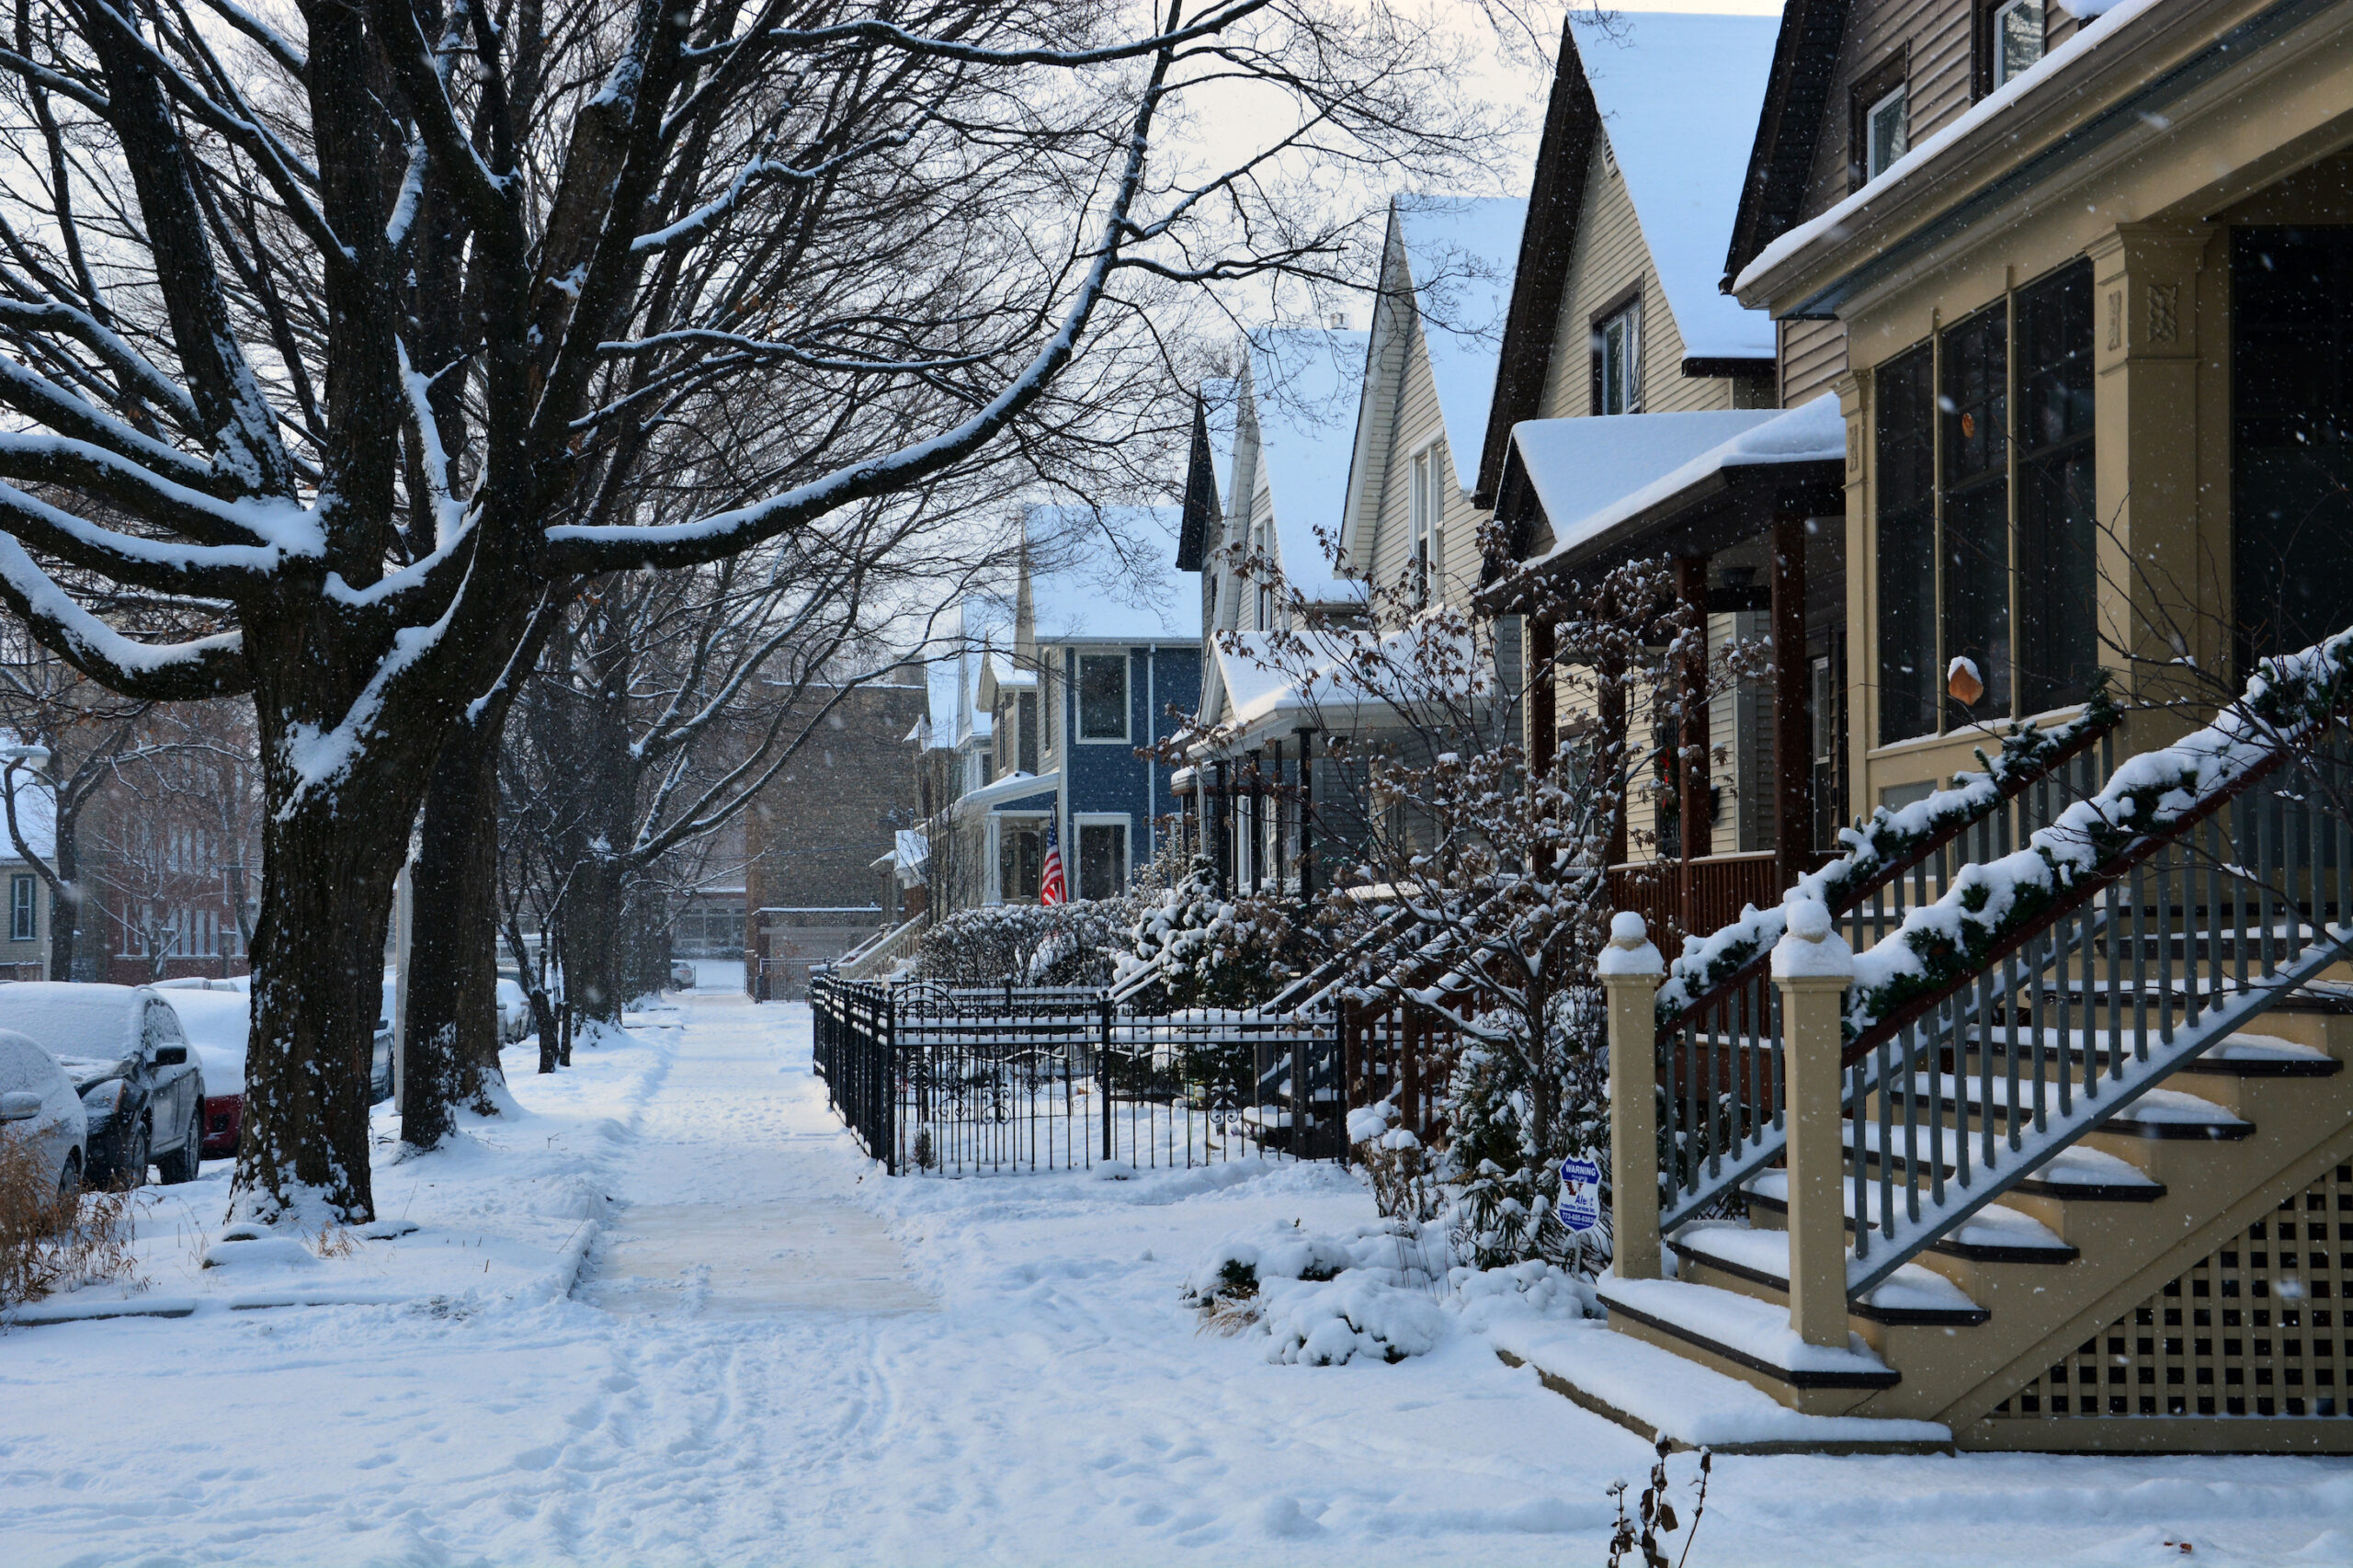 sell home in January - Fresh snow covers the sidewalk in a residential neighborhood of Chicago